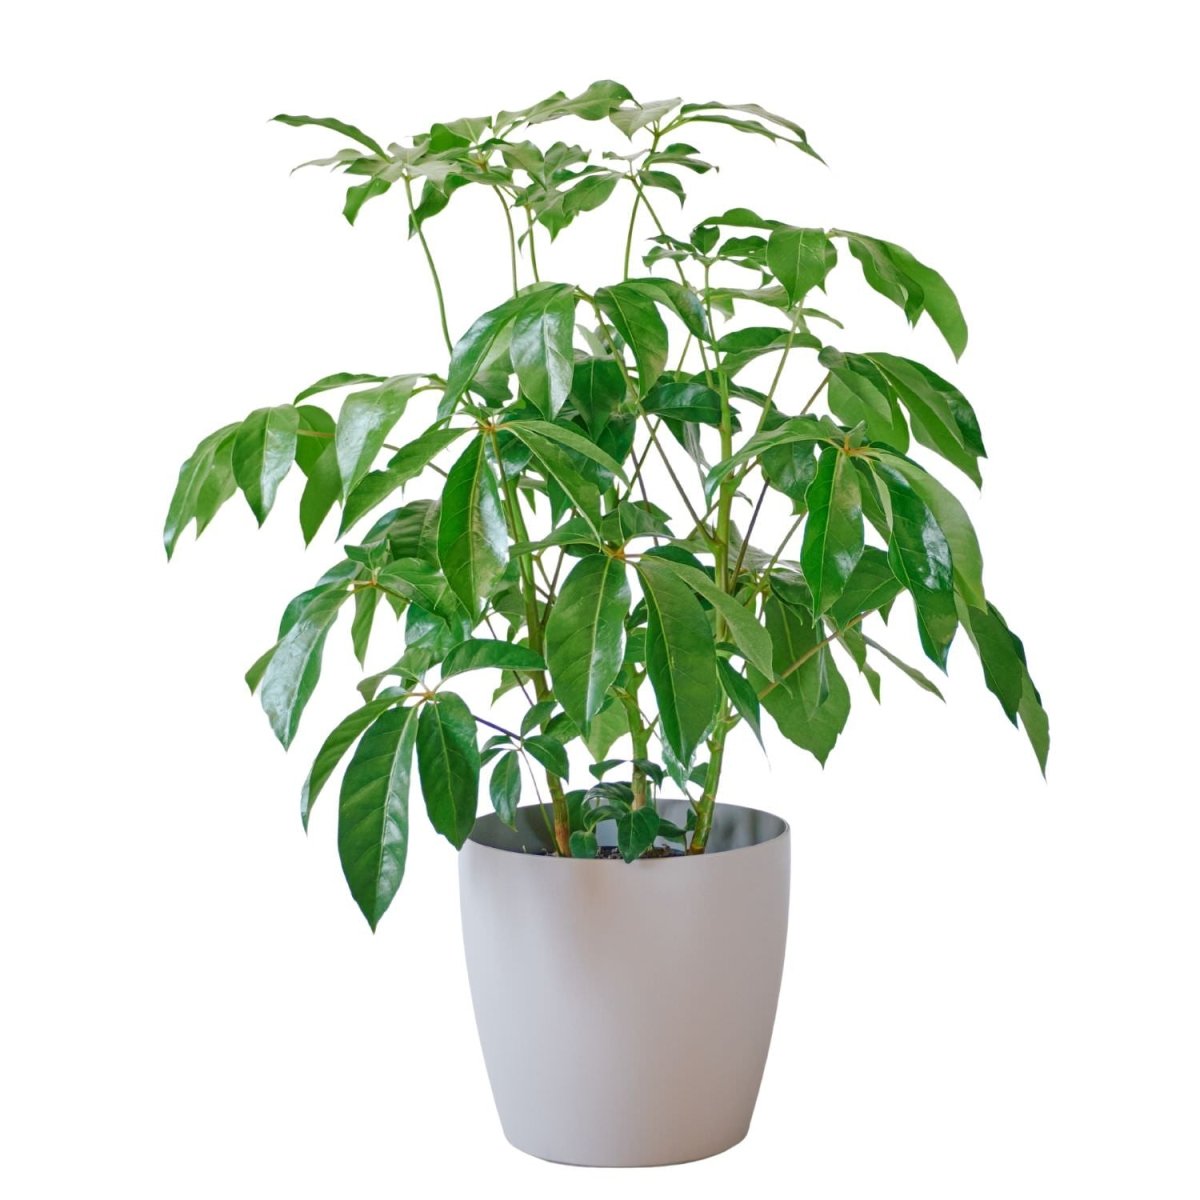 Schefflera Amate Potted In Lechuza Classico Trend Planter - Sand Brown - My City Plants